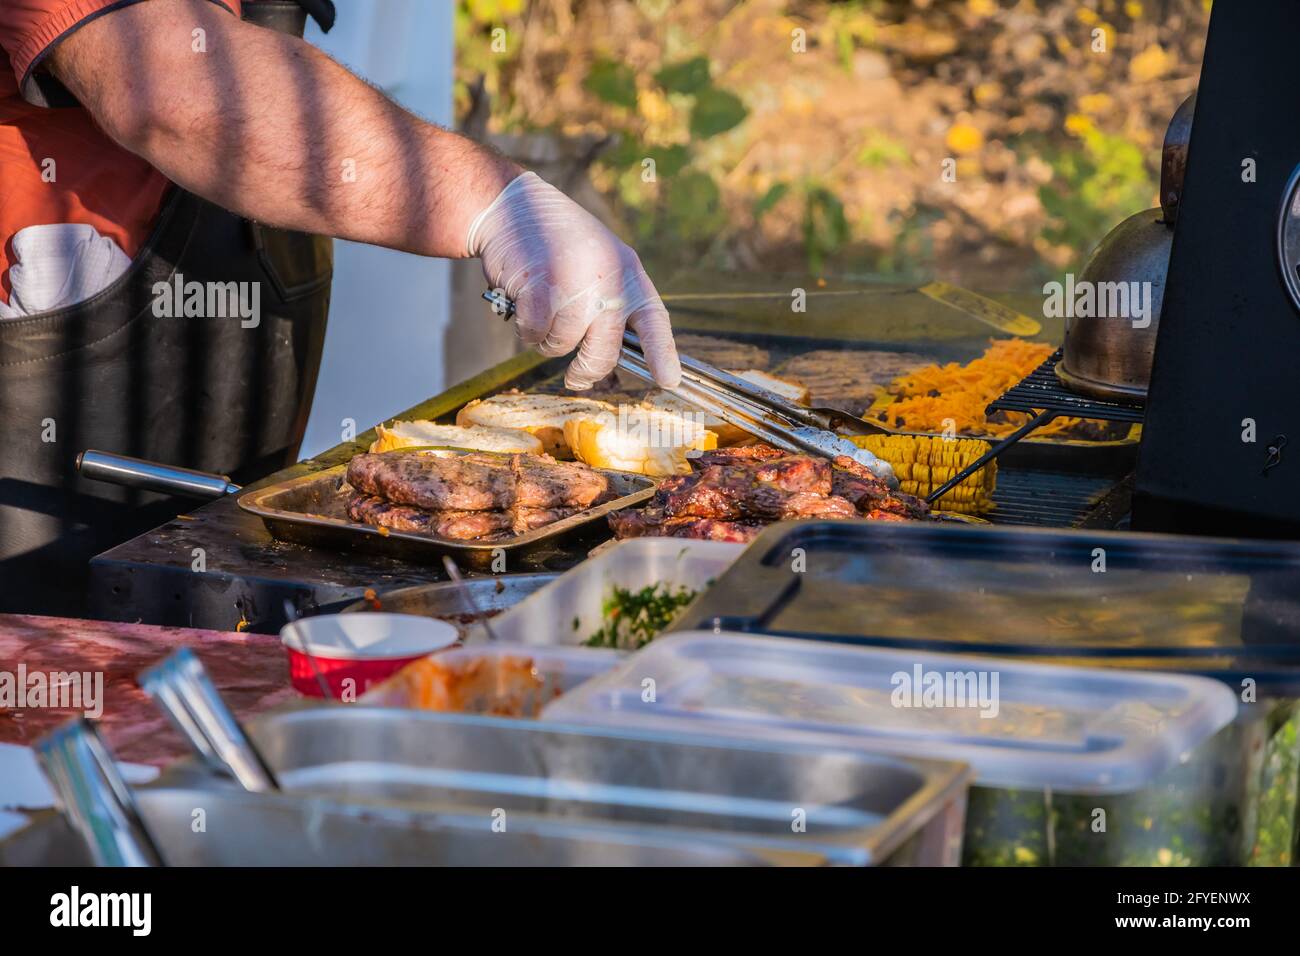 Cooking a burger from the ingredients. A professional chef prepares a burger. Barbecue festival in city park. fast food Stock Alamy